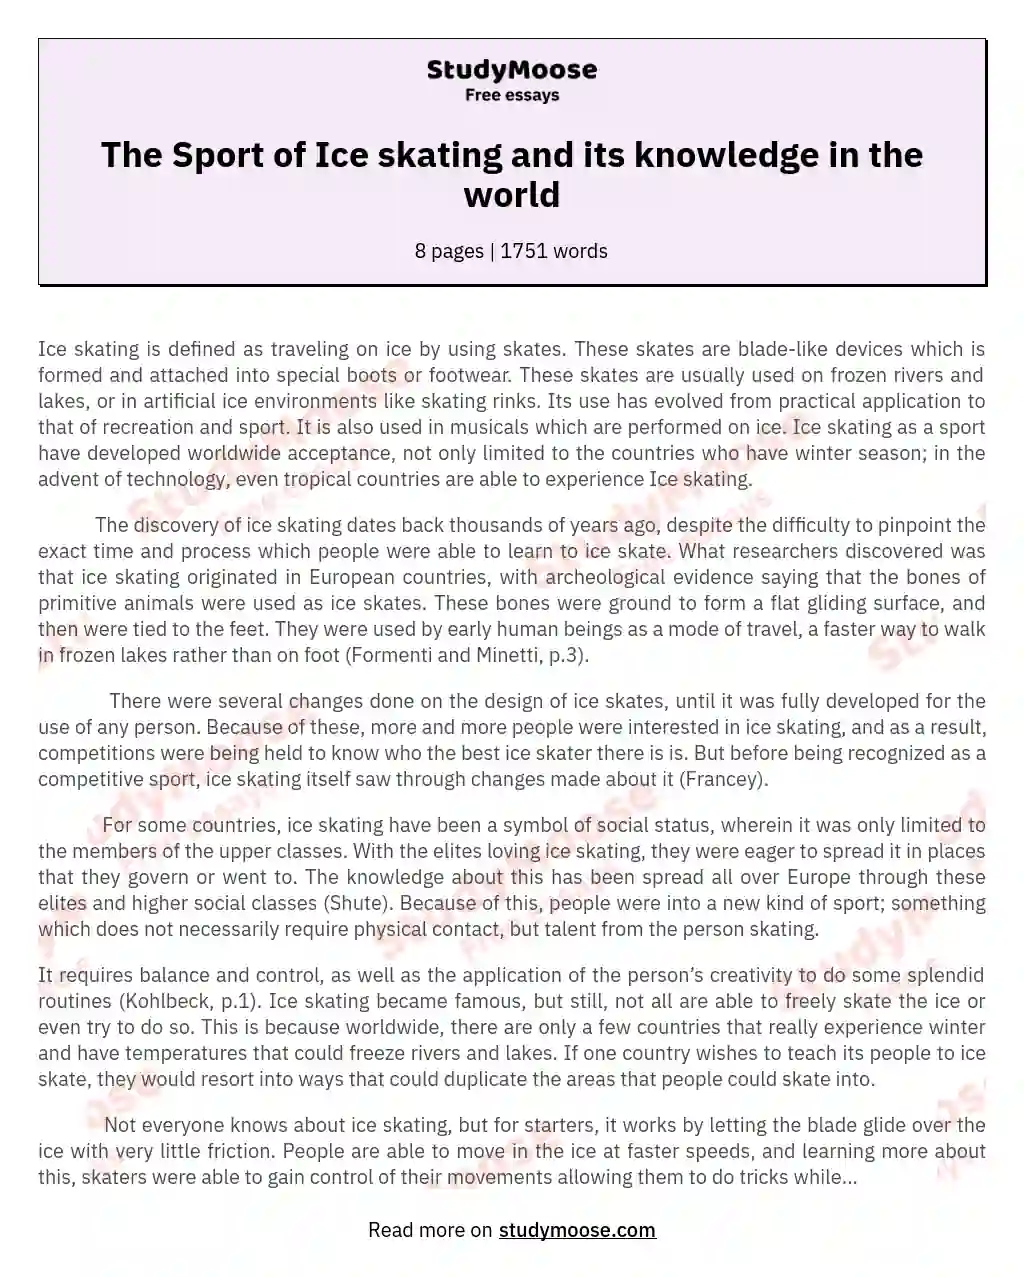 The Sport of Ice skating and its knowledge in the world essay